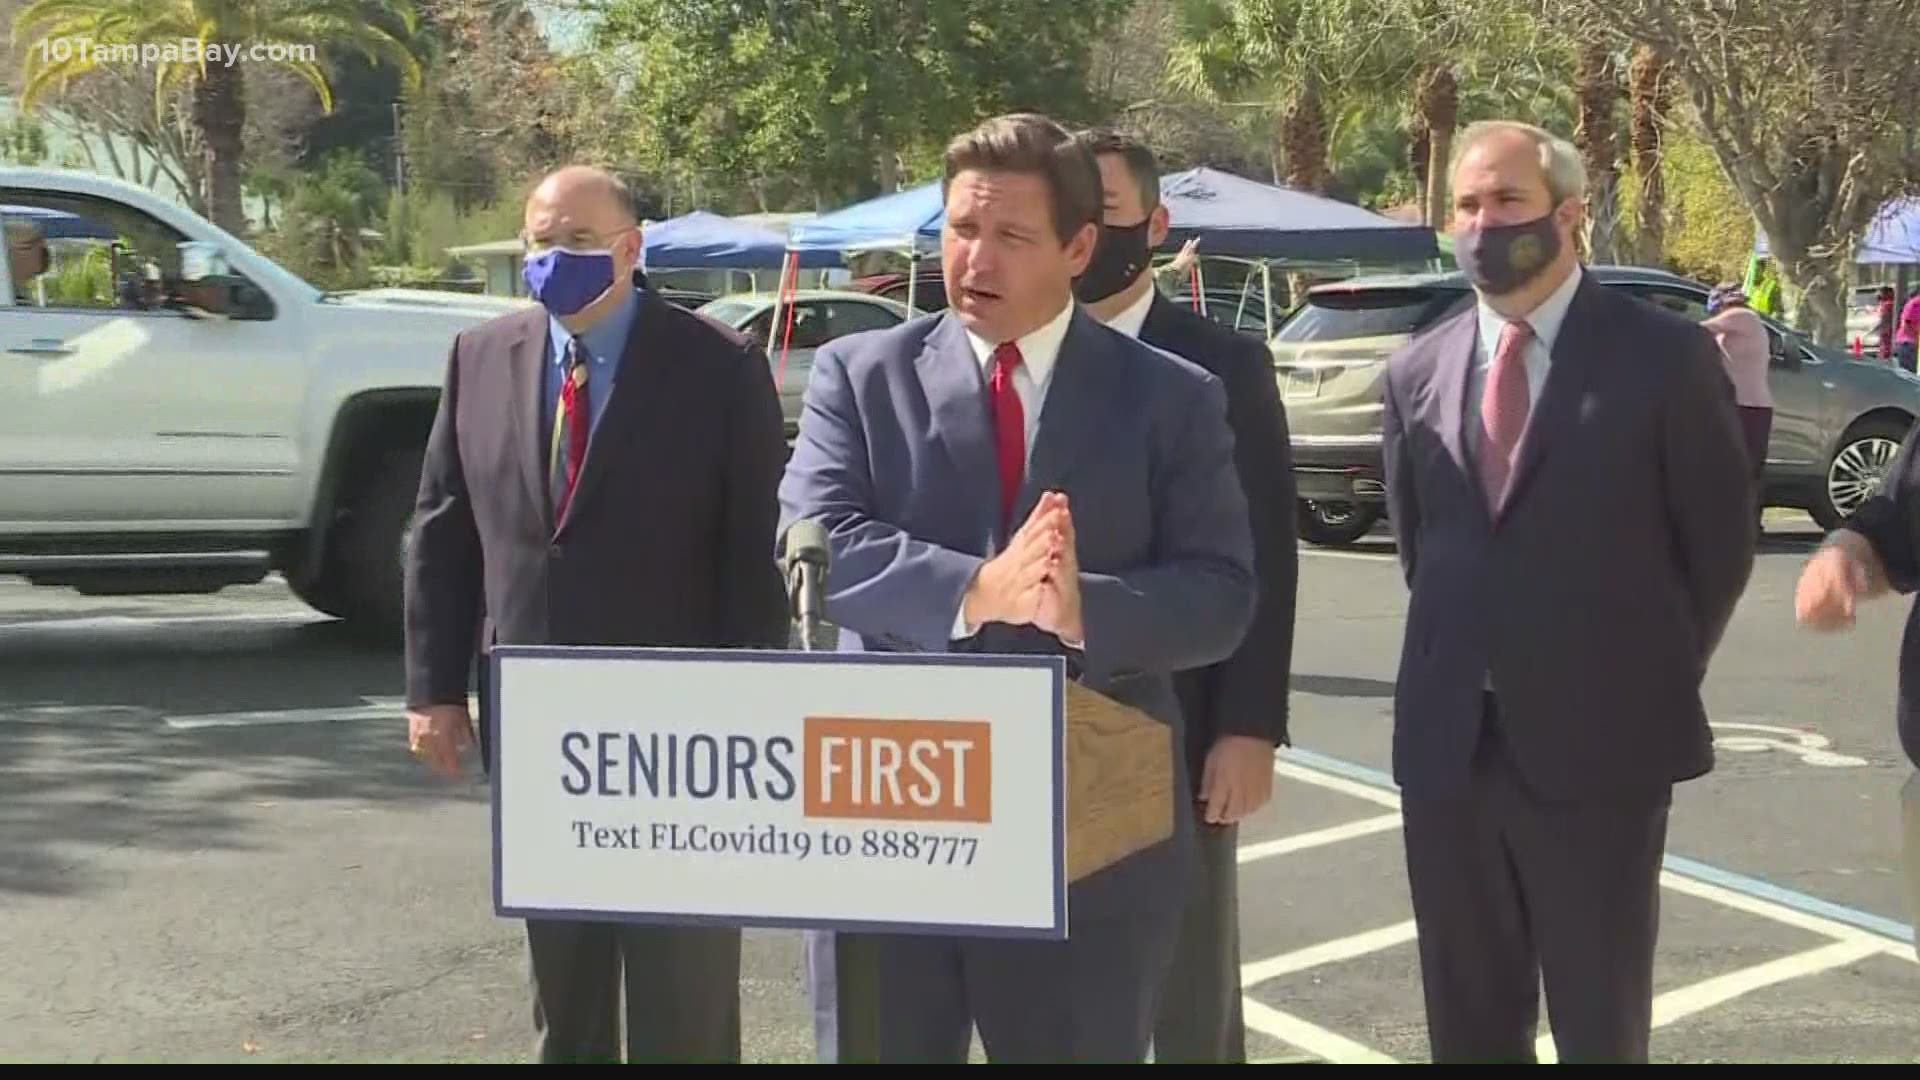 Gov. DeSantis says 3,000 seniors will now be able to get vaccinated.